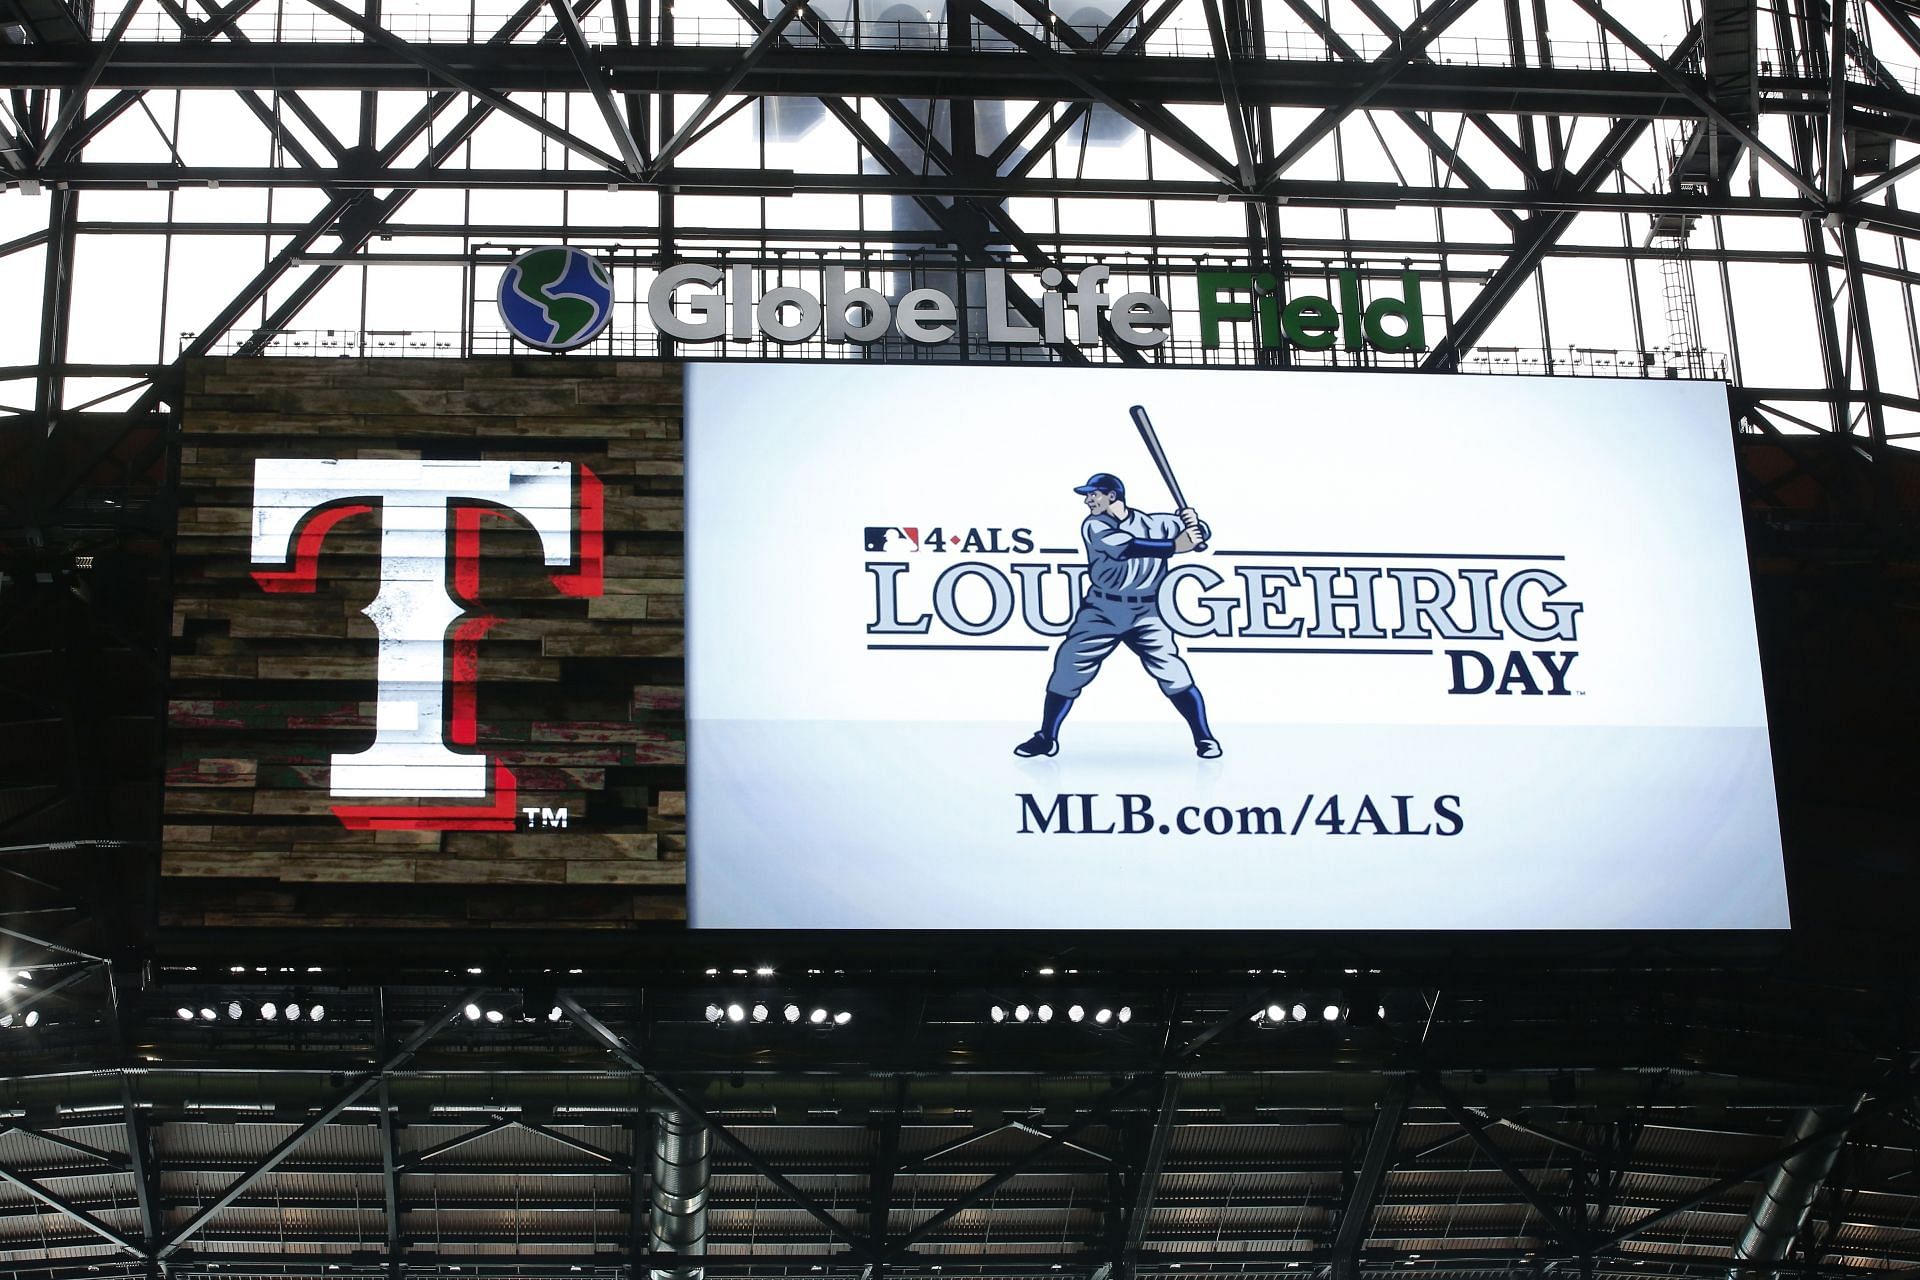 June 2nd is Lou Gehrig Day. Come join me on this unique experience